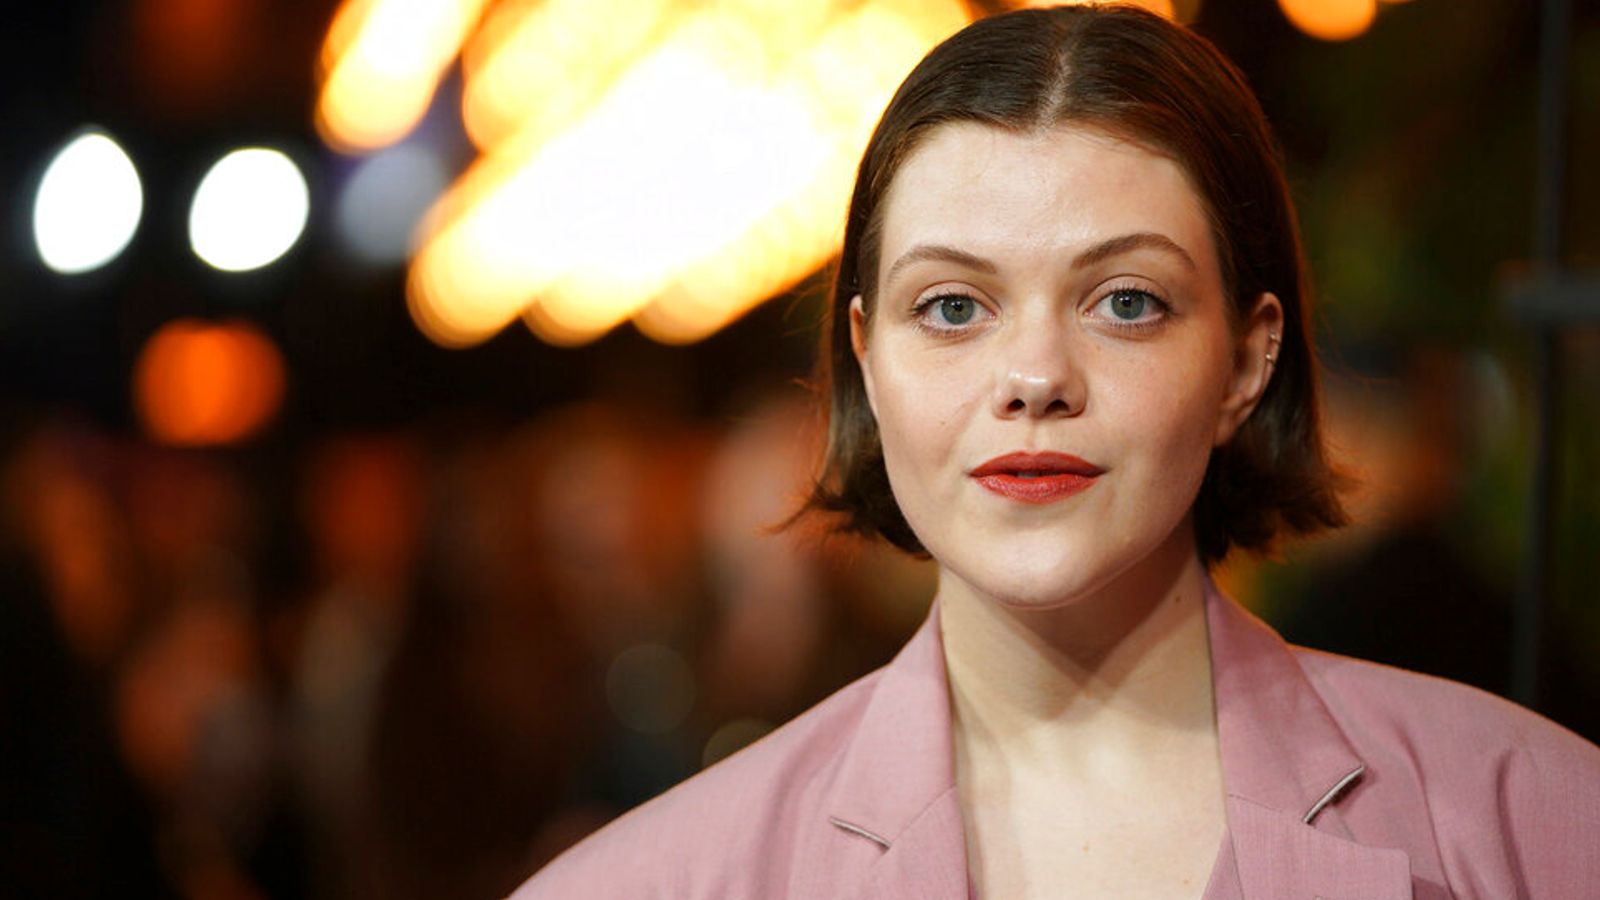 Georgie Henley: Actress reveals she had flesh-eating infection and shares scar photo to speak out about visibility